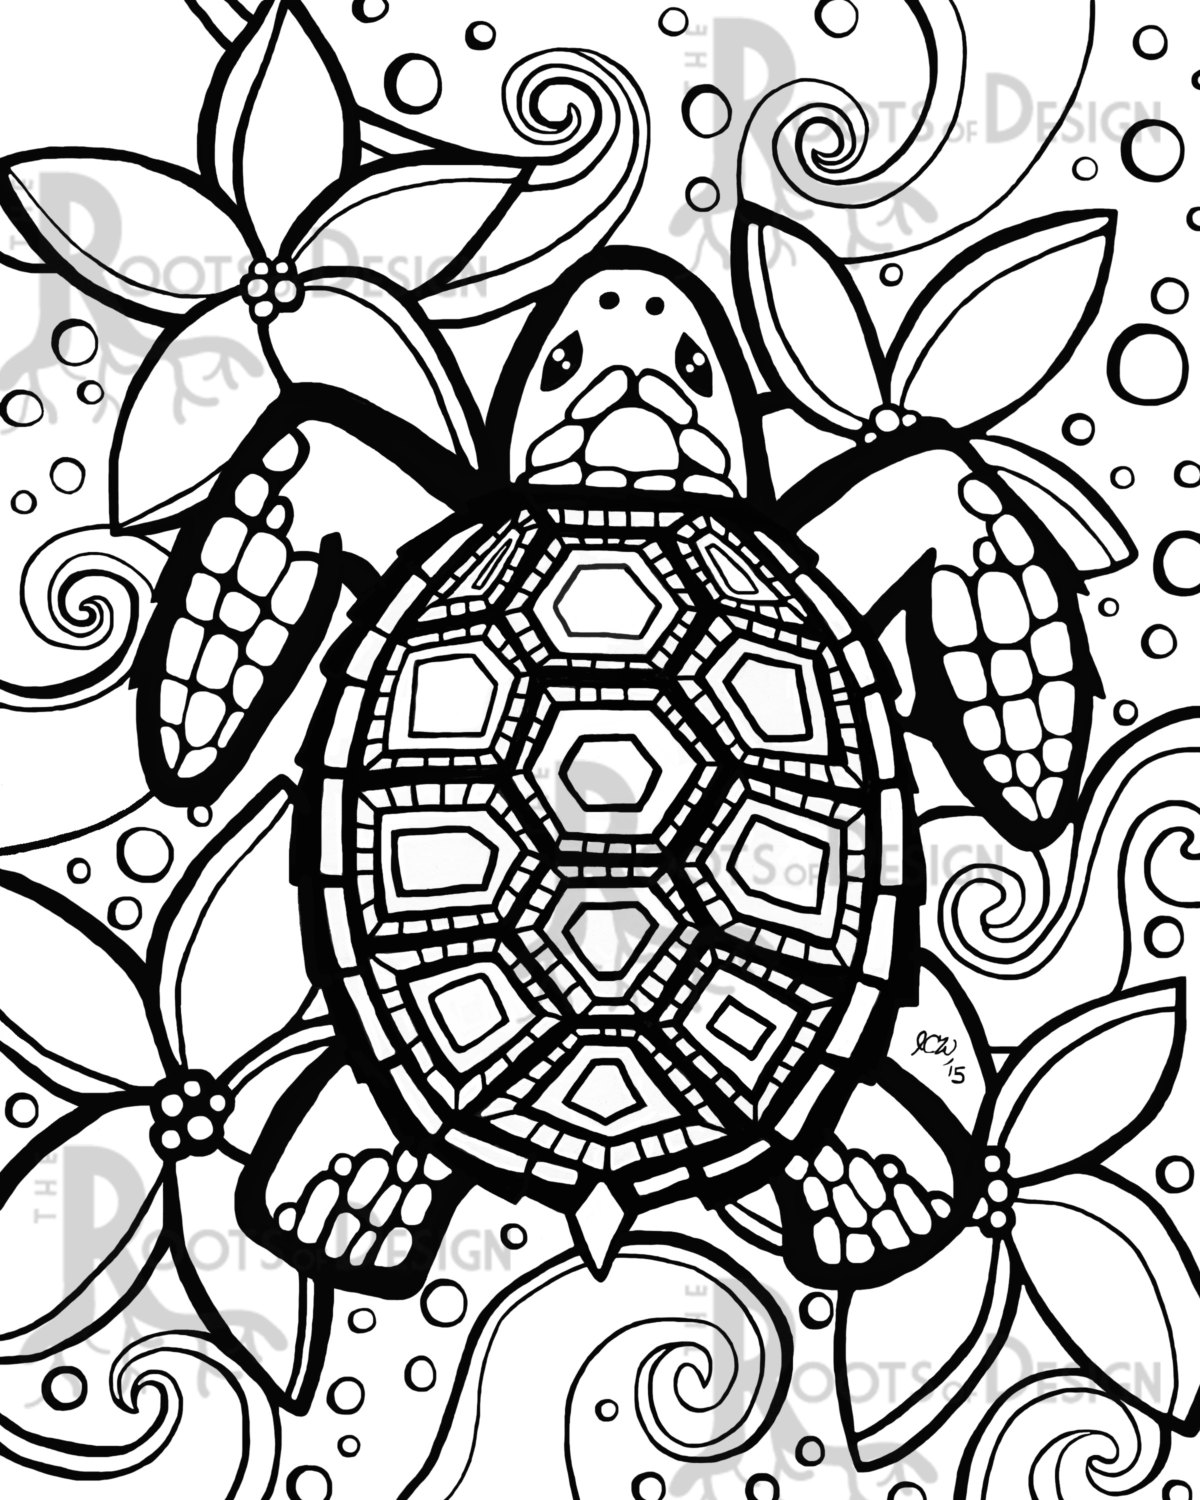 Free Stress Relief Coloring Pages At GetDrawings Free Download